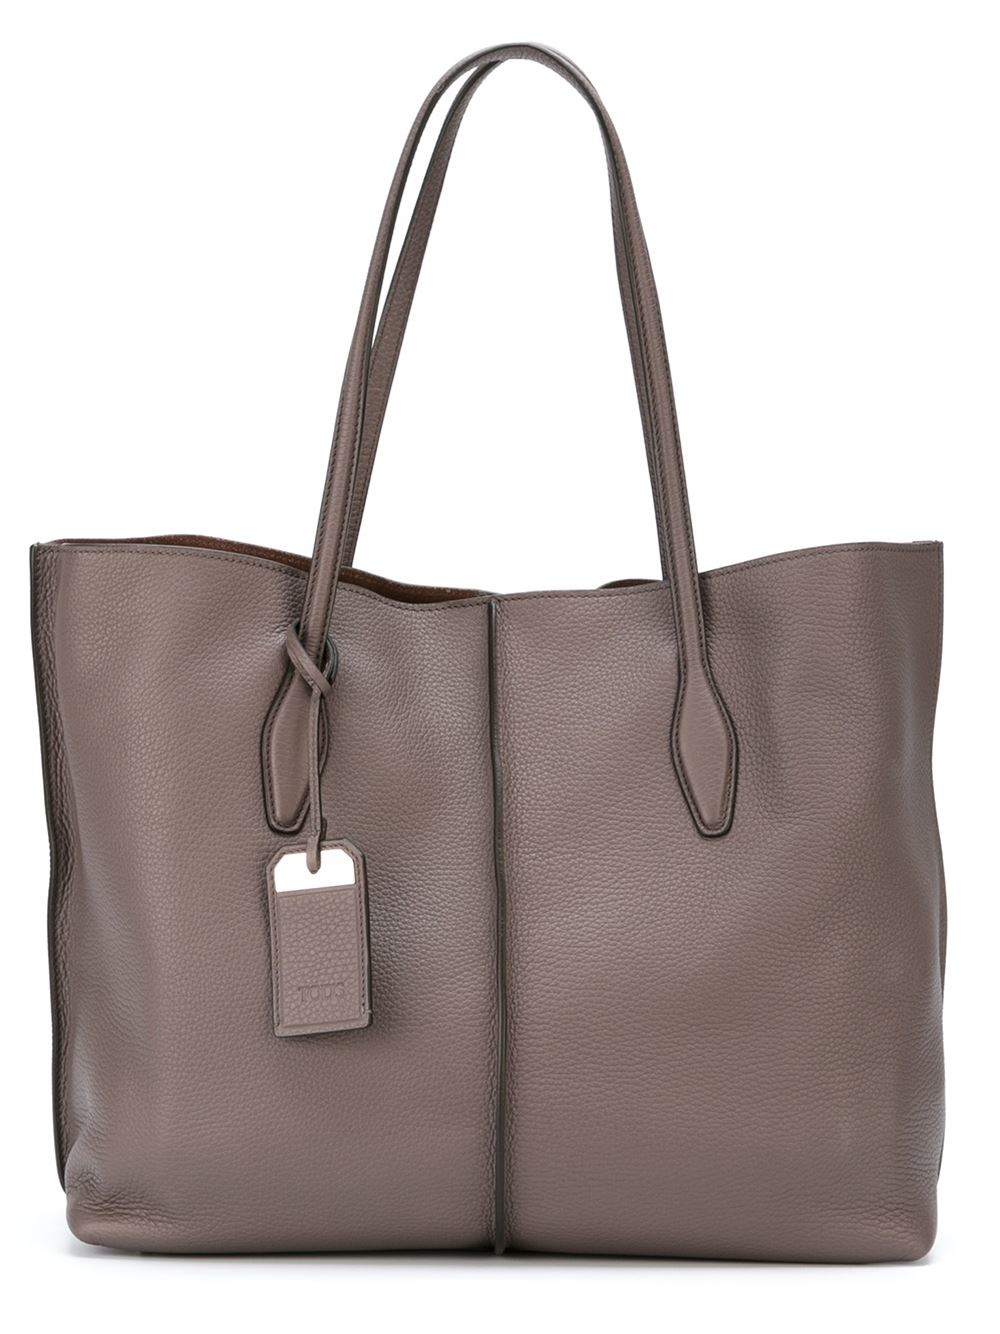 Lyst - Tod's 'joy' Shopping Tote in Gray